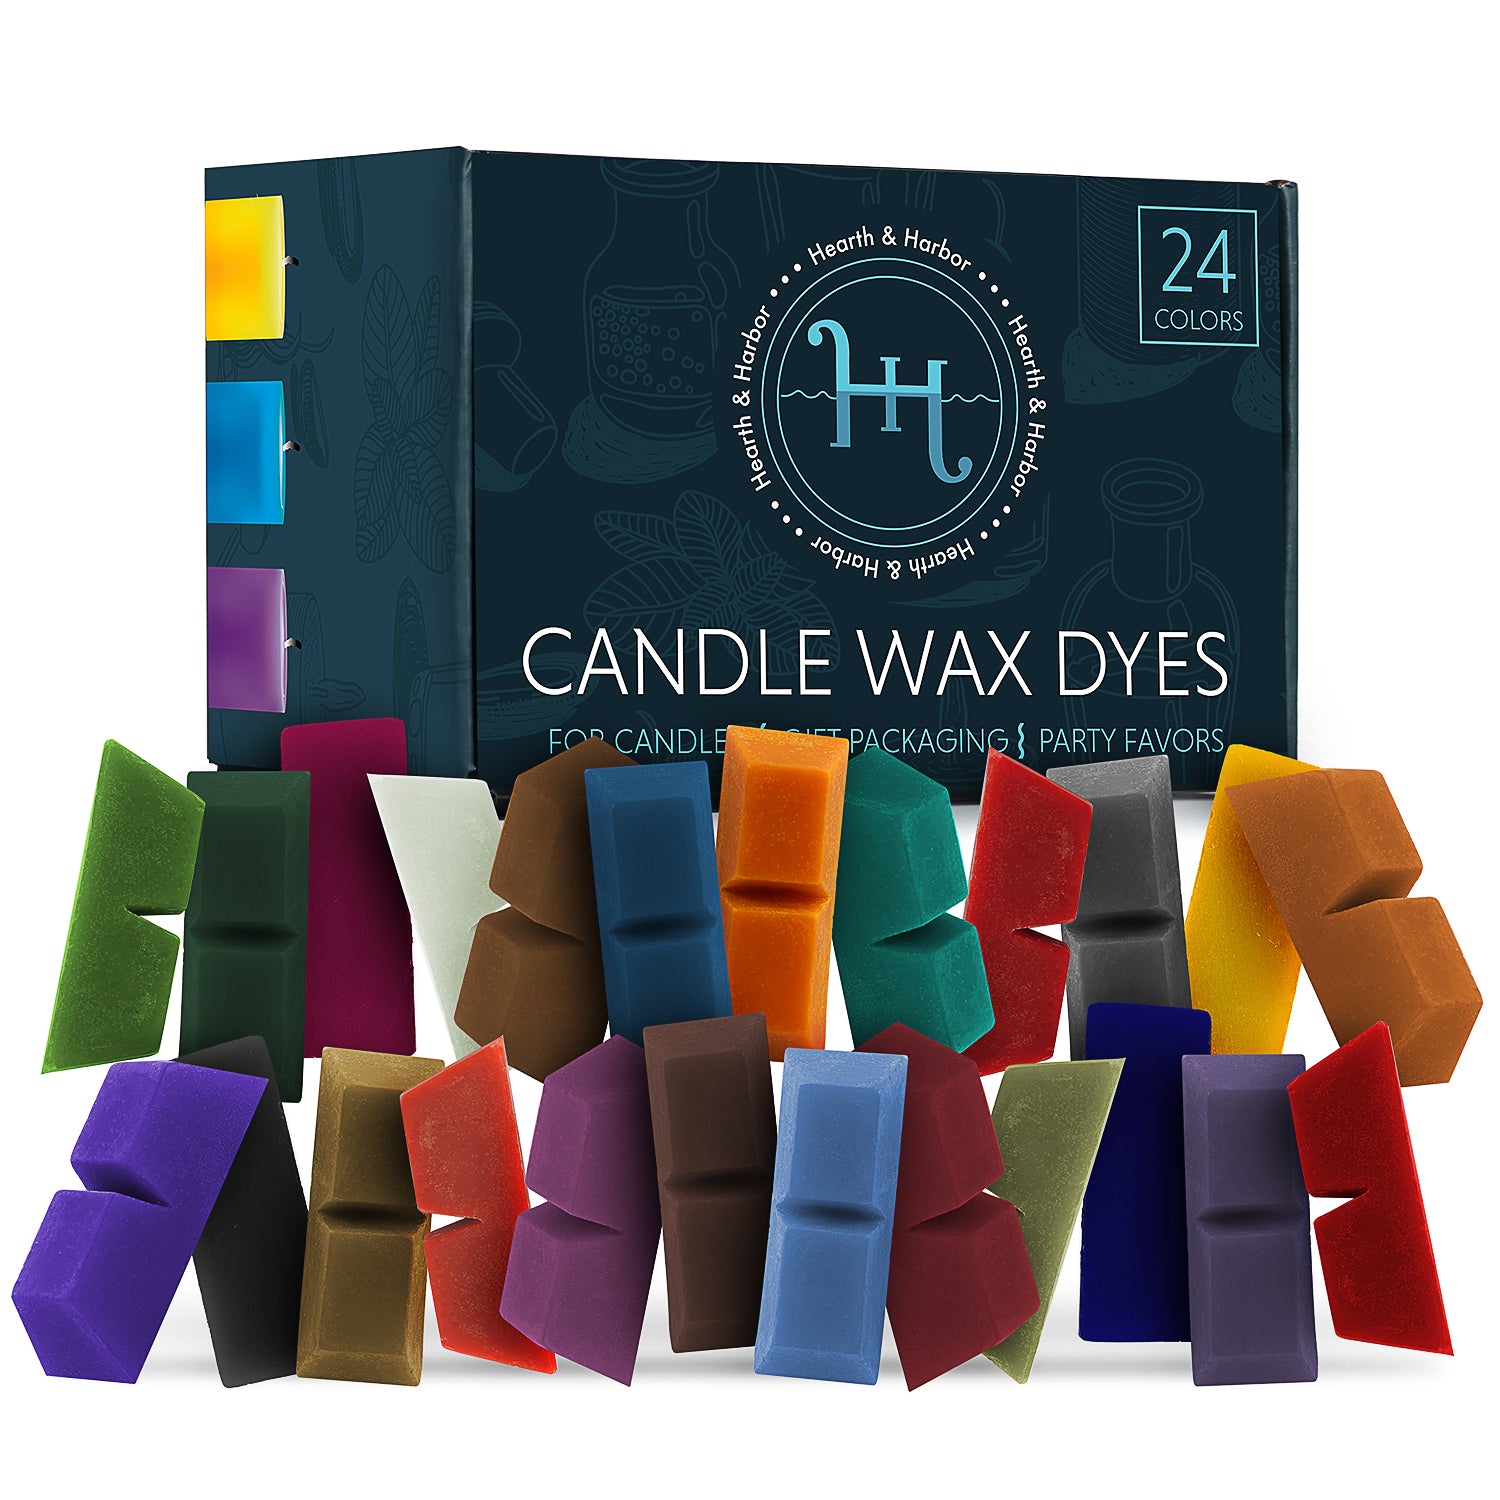 Hearts & Crafts Soy Wax Candle Dye - 20 Color Wax Chip Dyes for